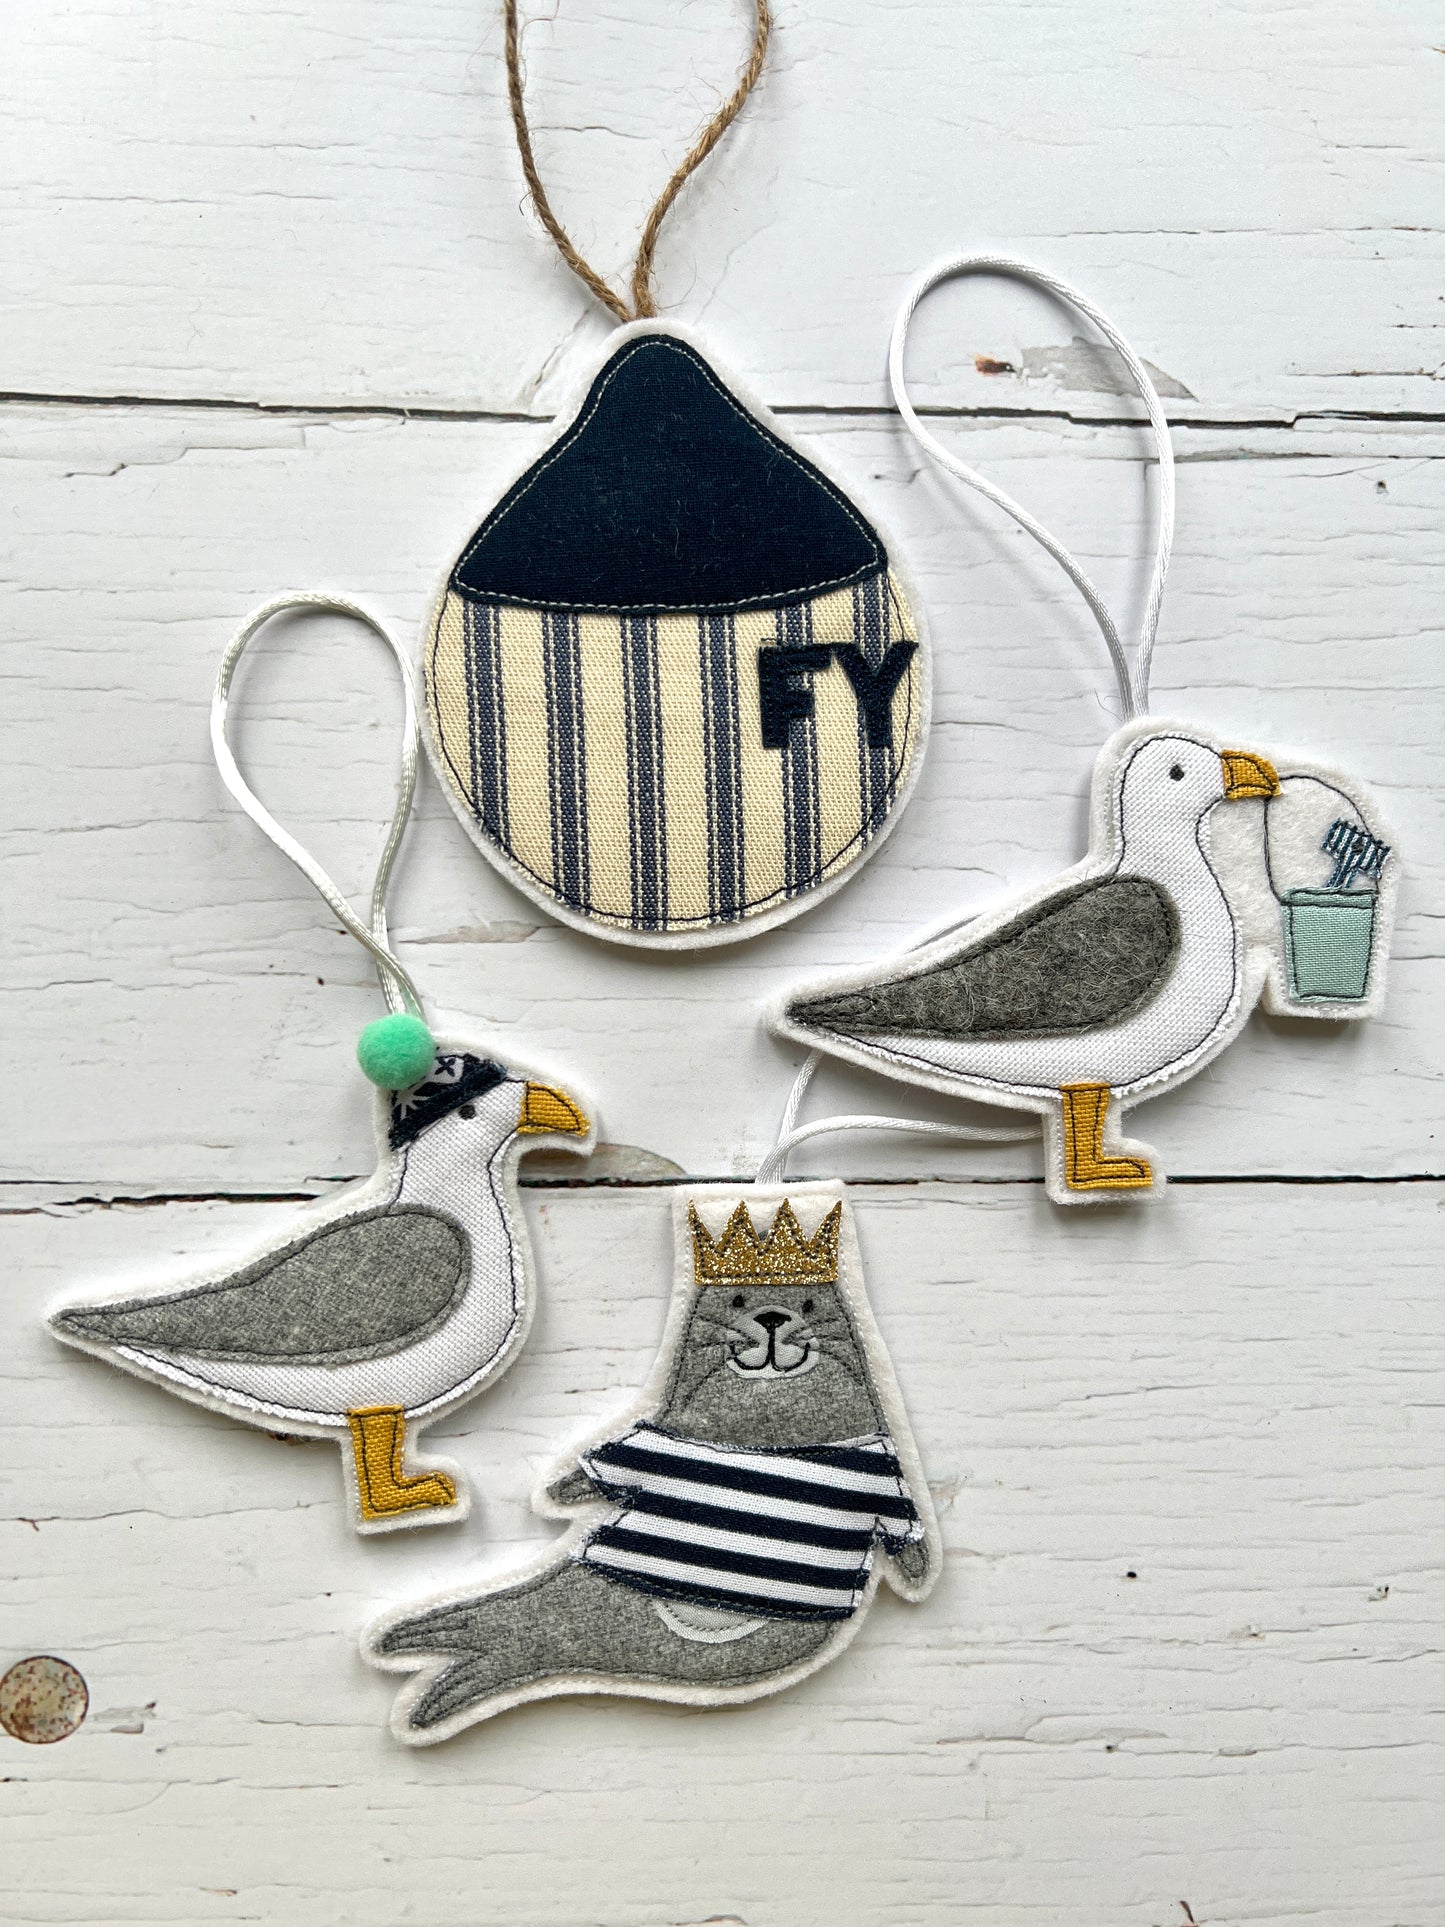 fabric embroidered decorations: buoy, seagulls, seal